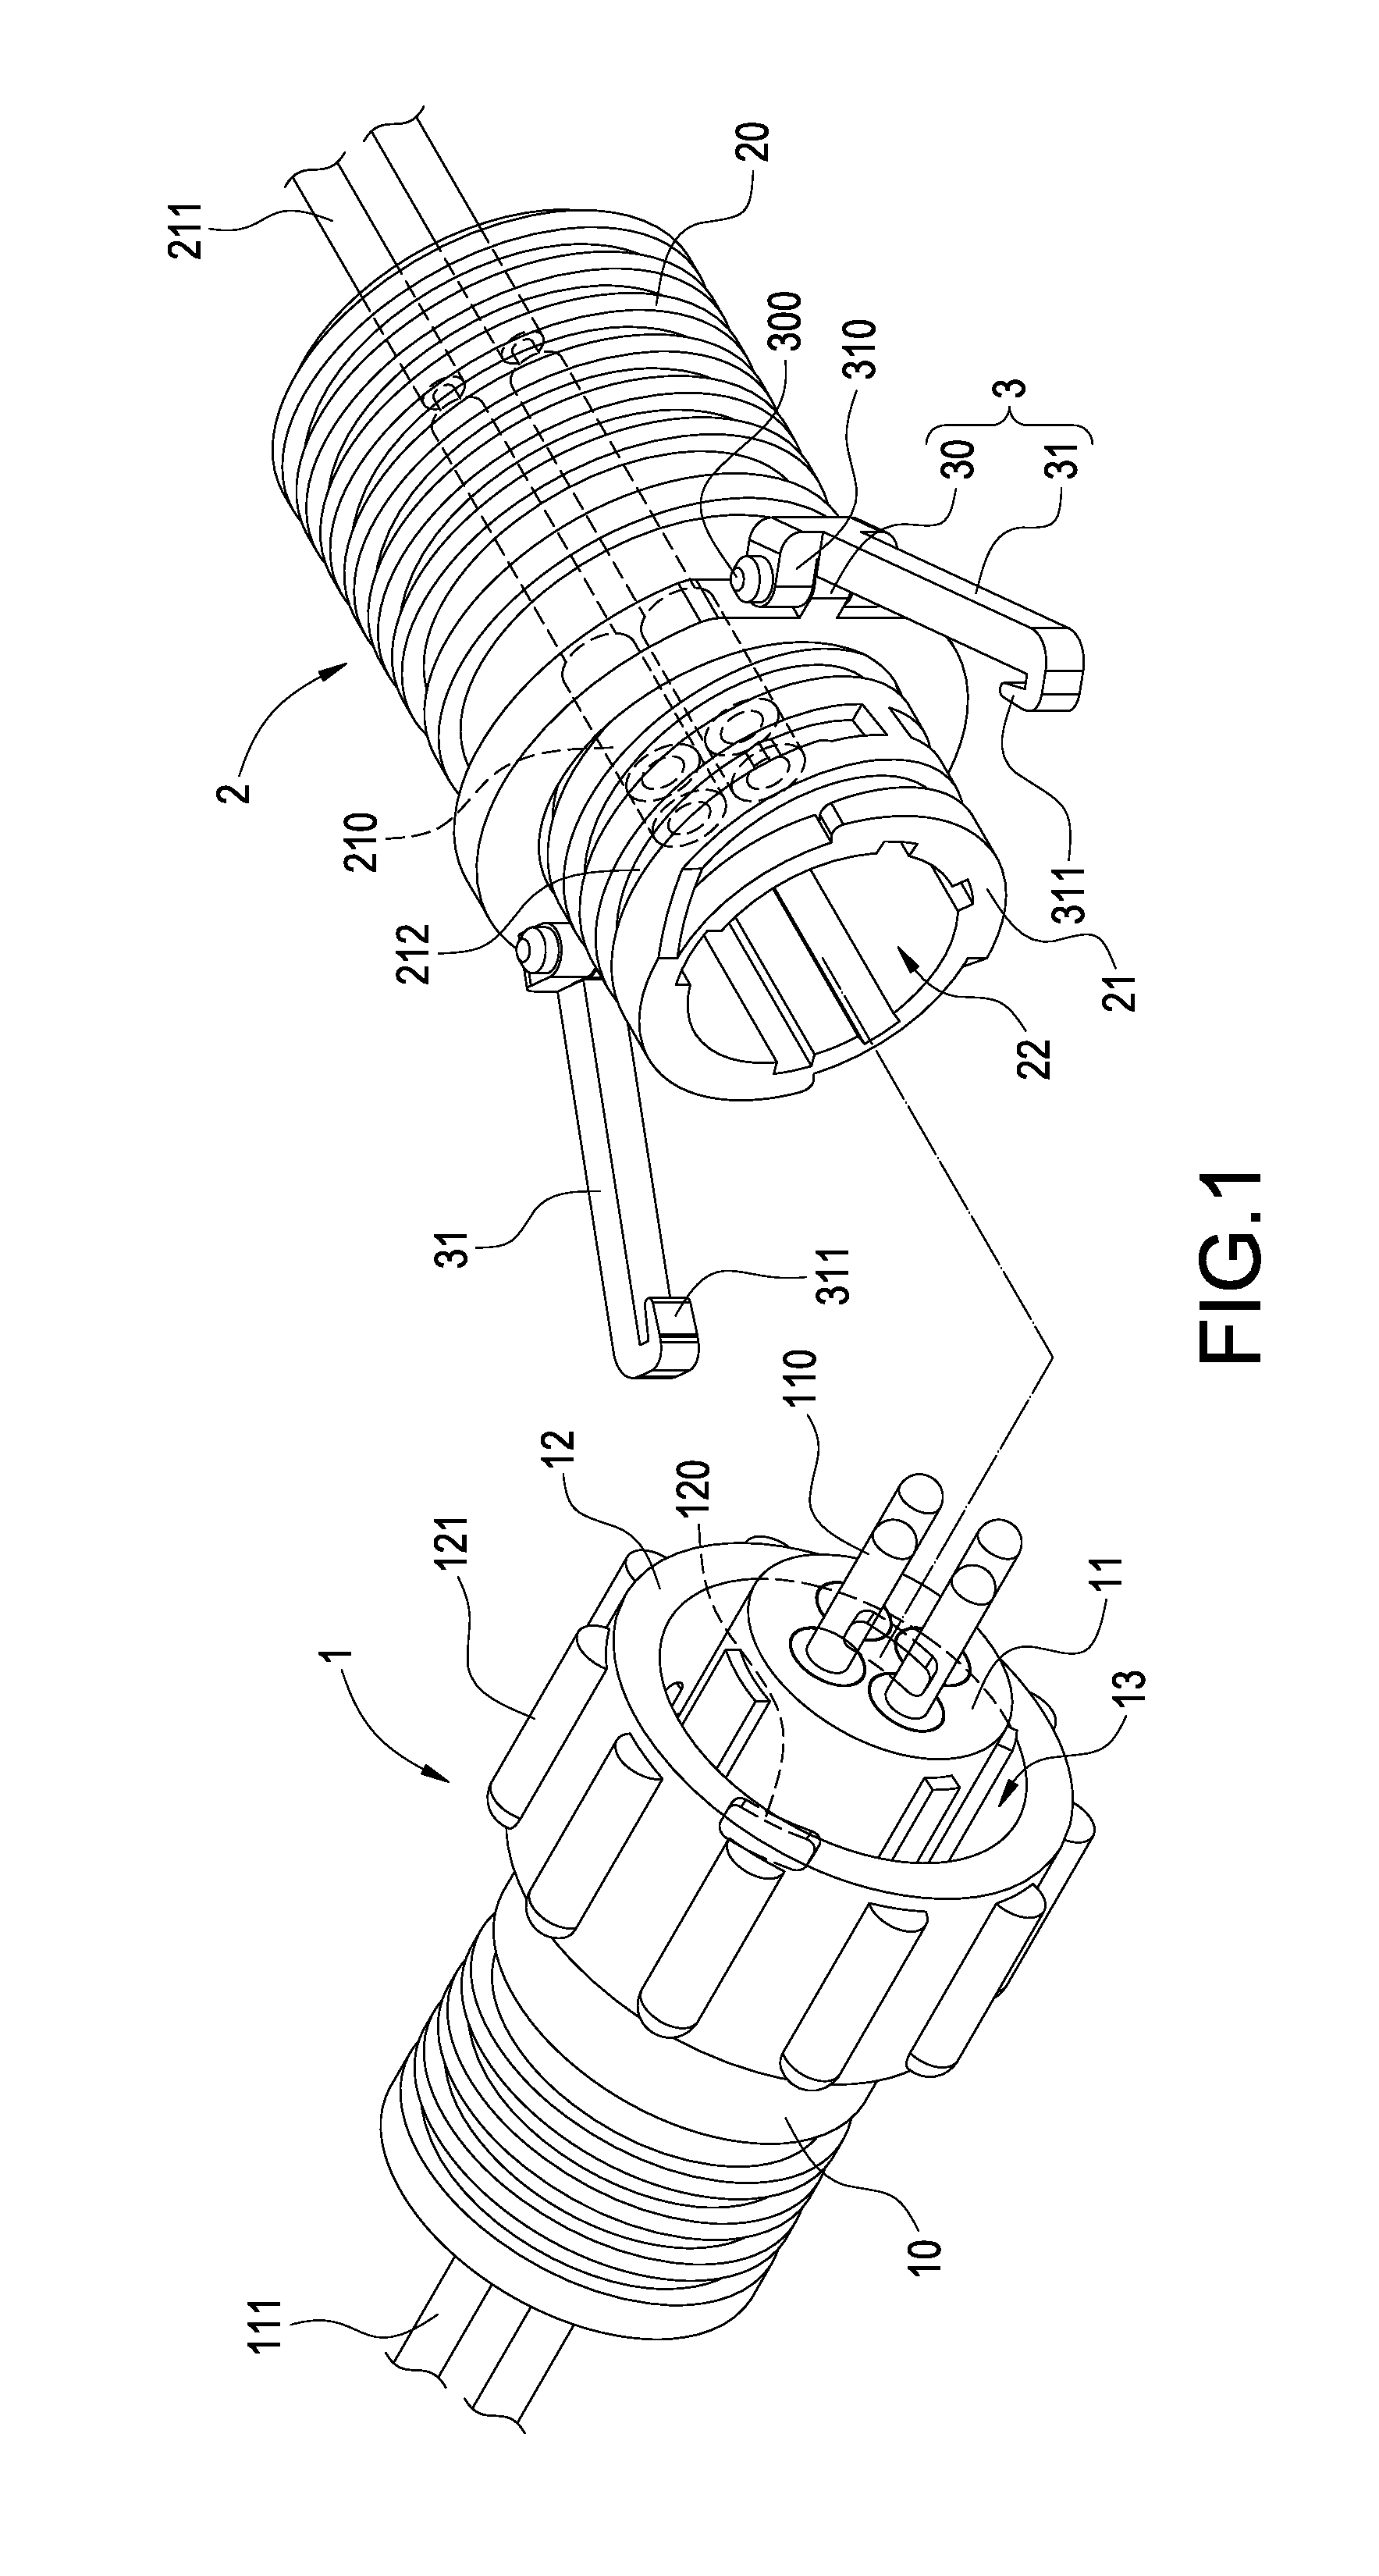 Cable connector joint fastening structure